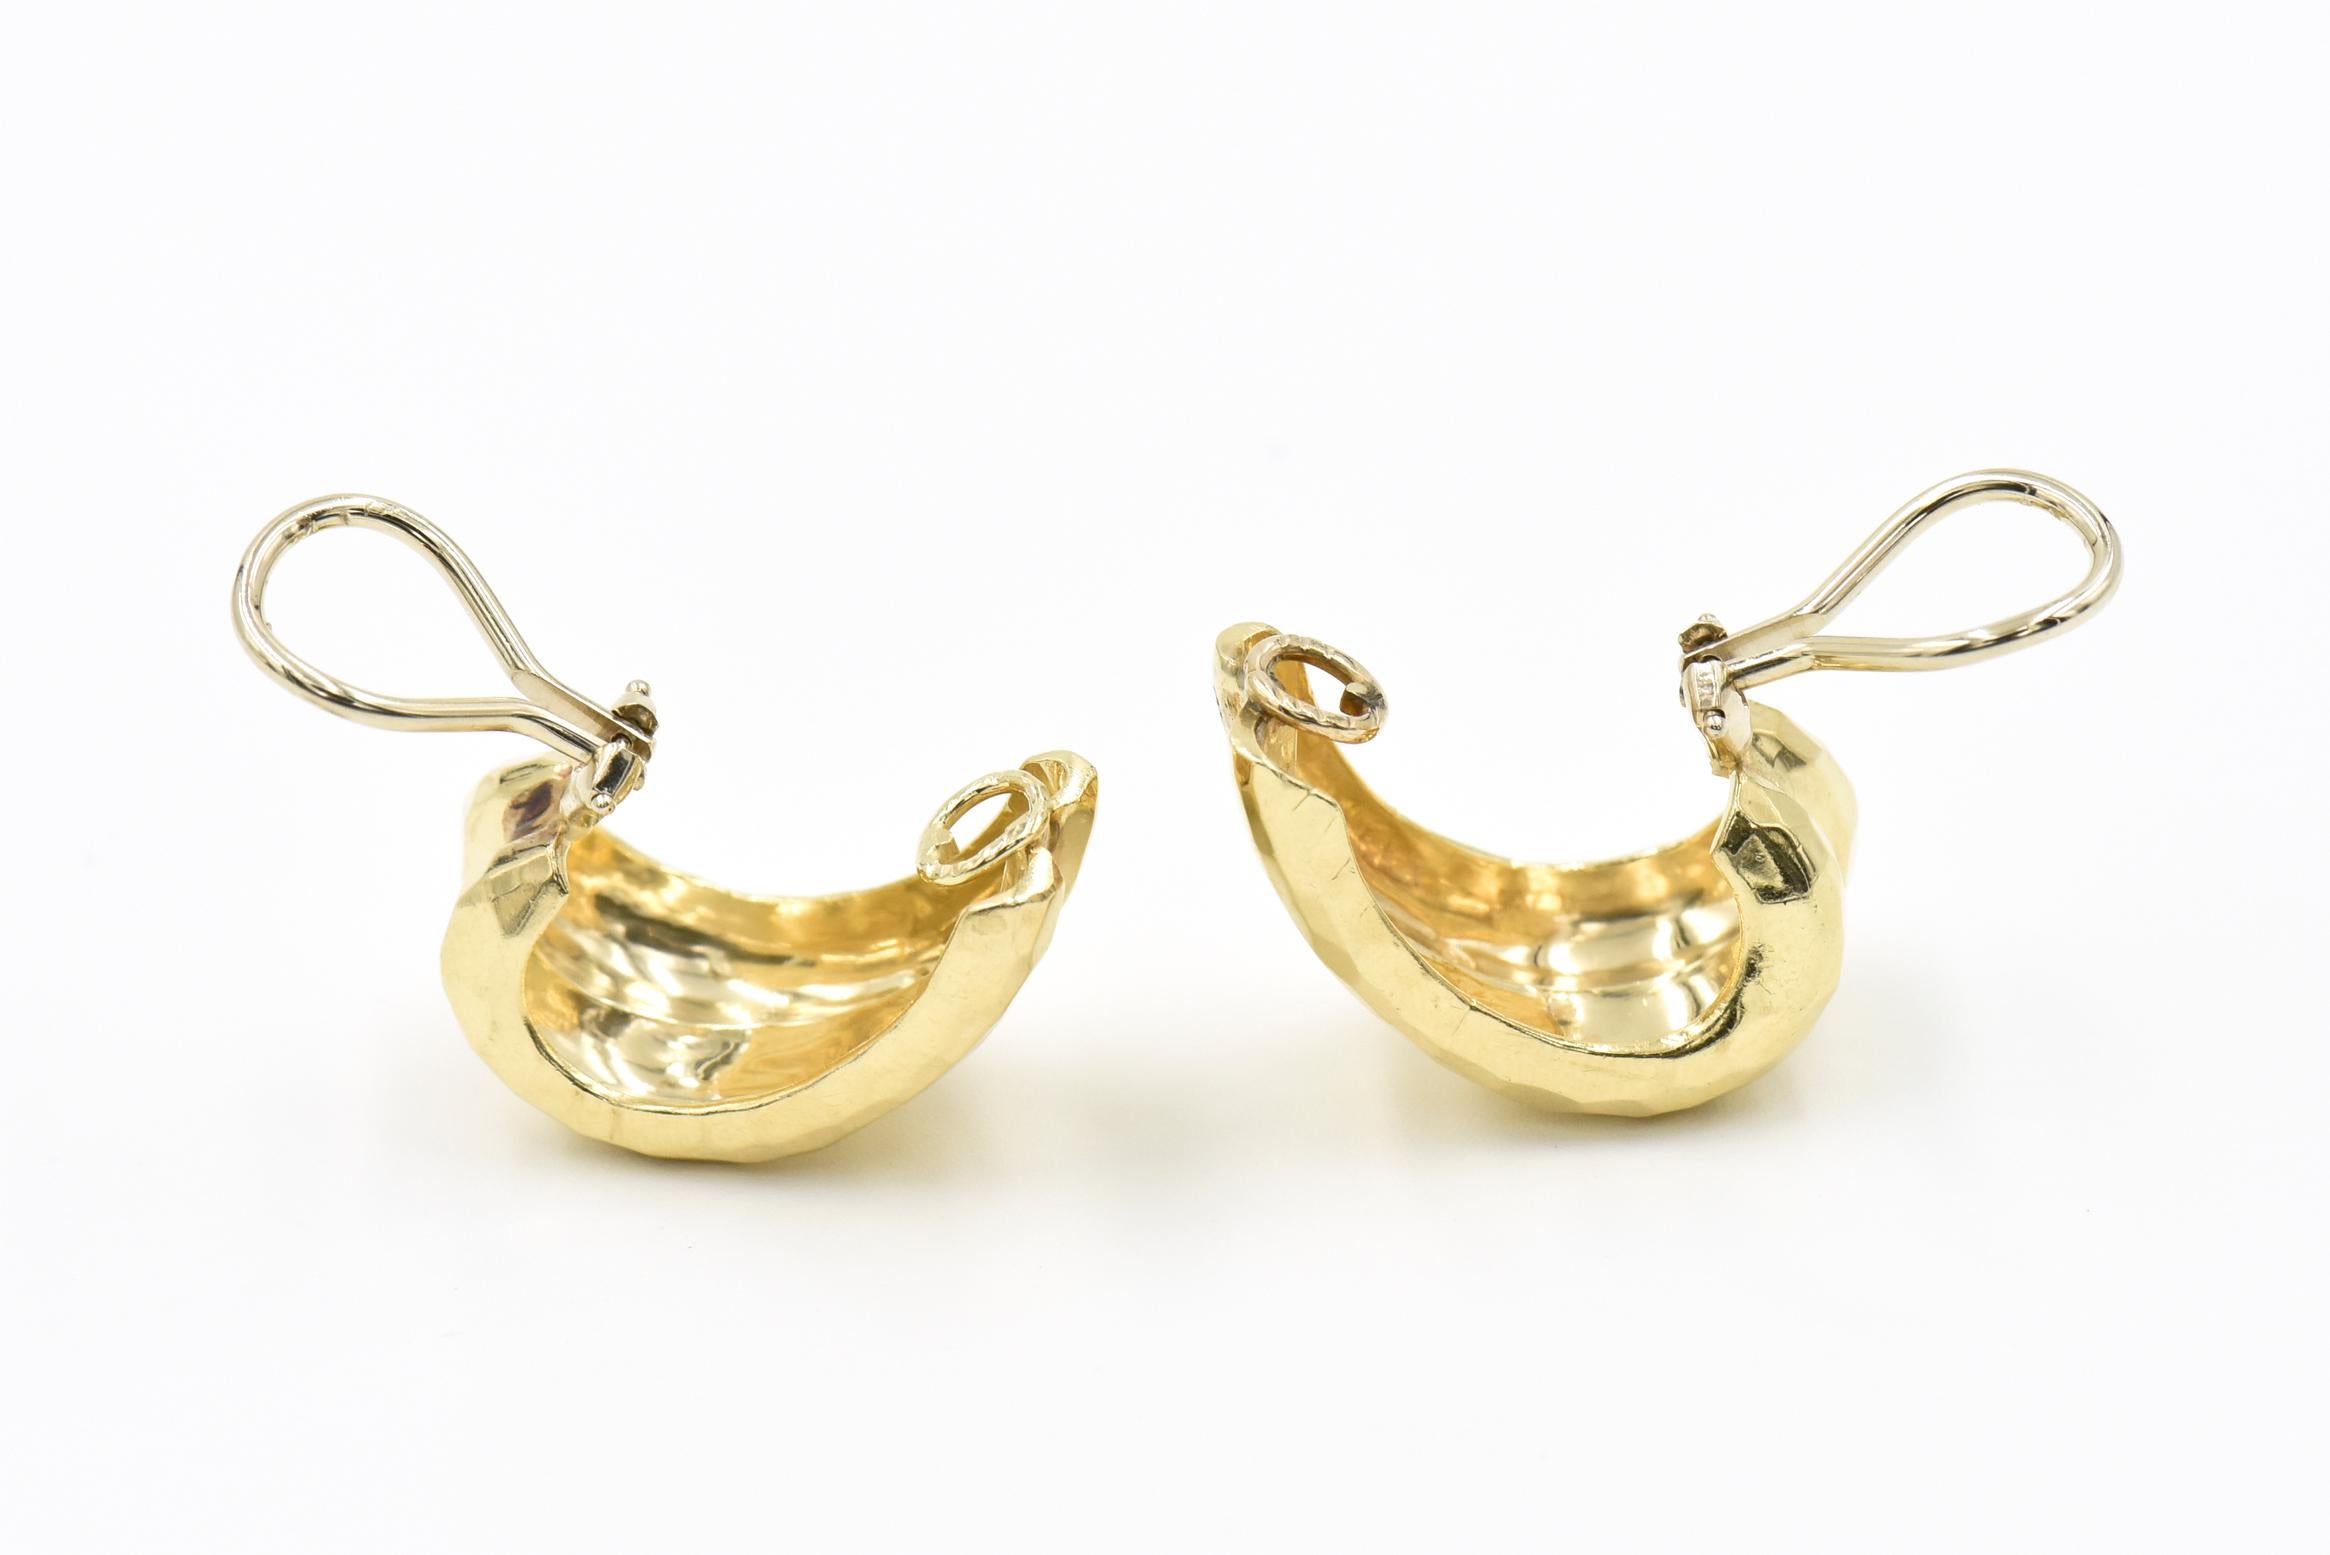 Hammered Yellow Gold Clip-On Hoop Earrings by Rotkel In Excellent Condition For Sale In Miami Beach, FL